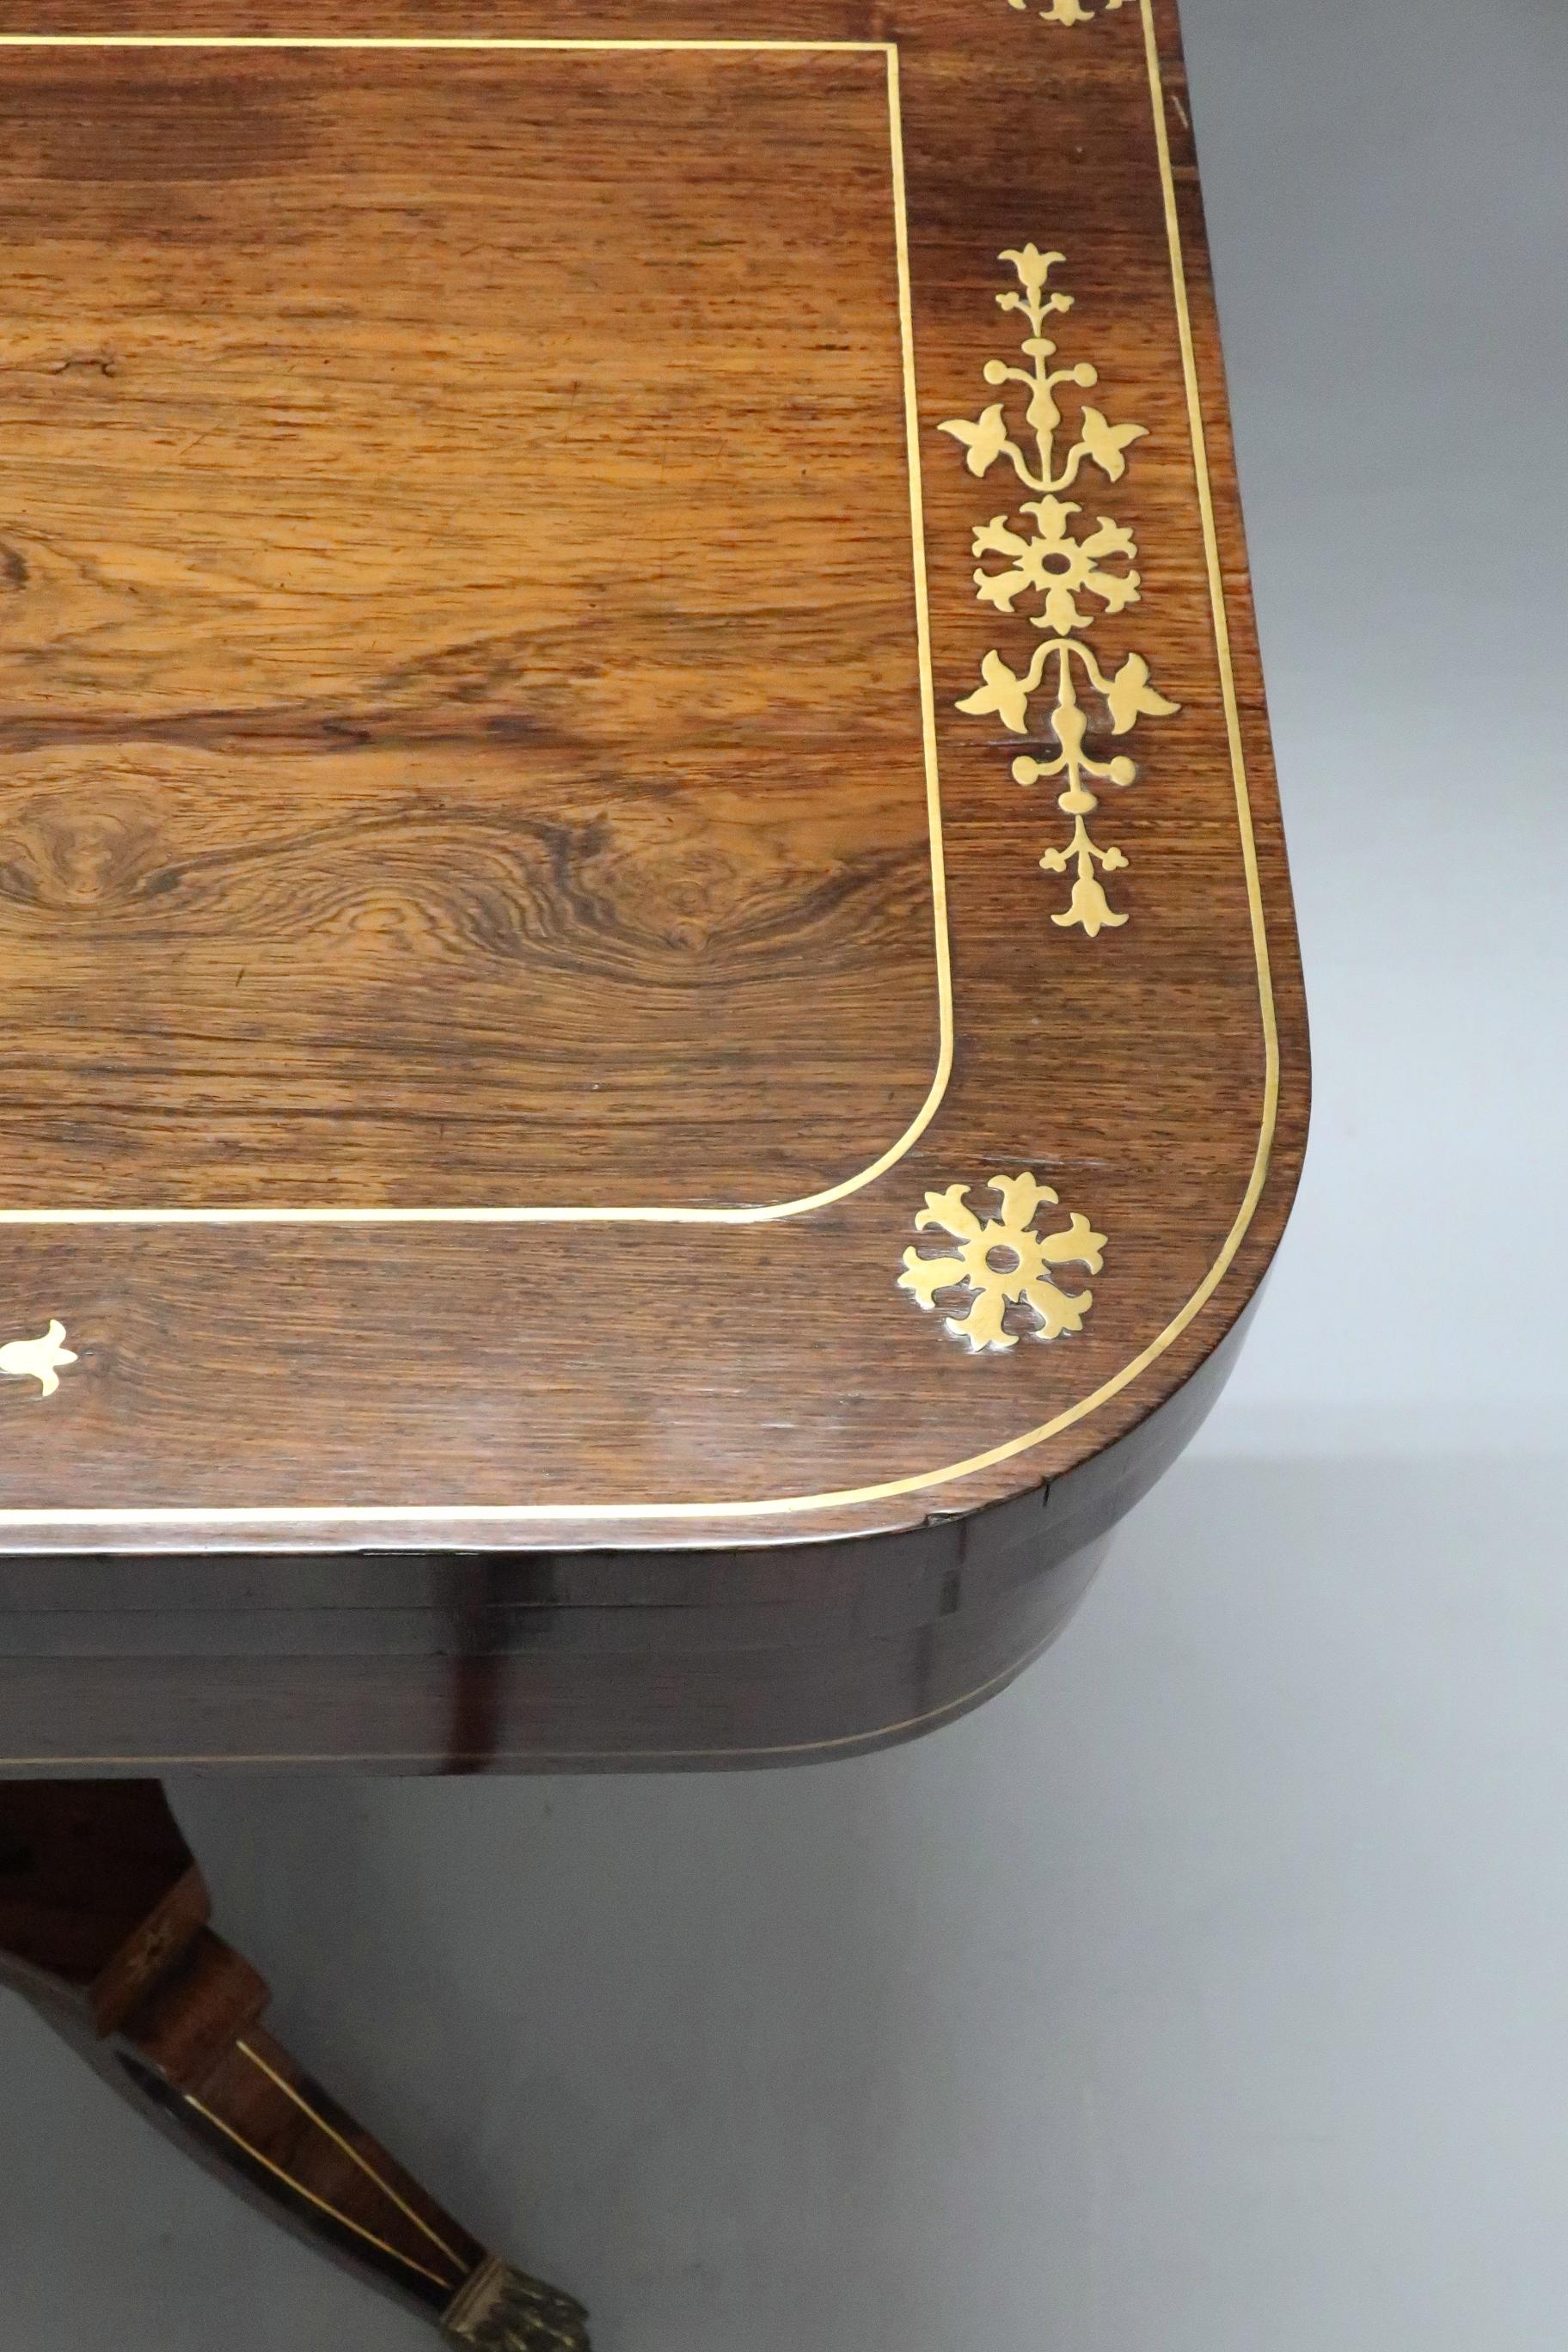 English Regency Rosewood and Brass Inlaid Side Table Attributed to John Mclean In Good Condition For Sale In Macclesfield, GB